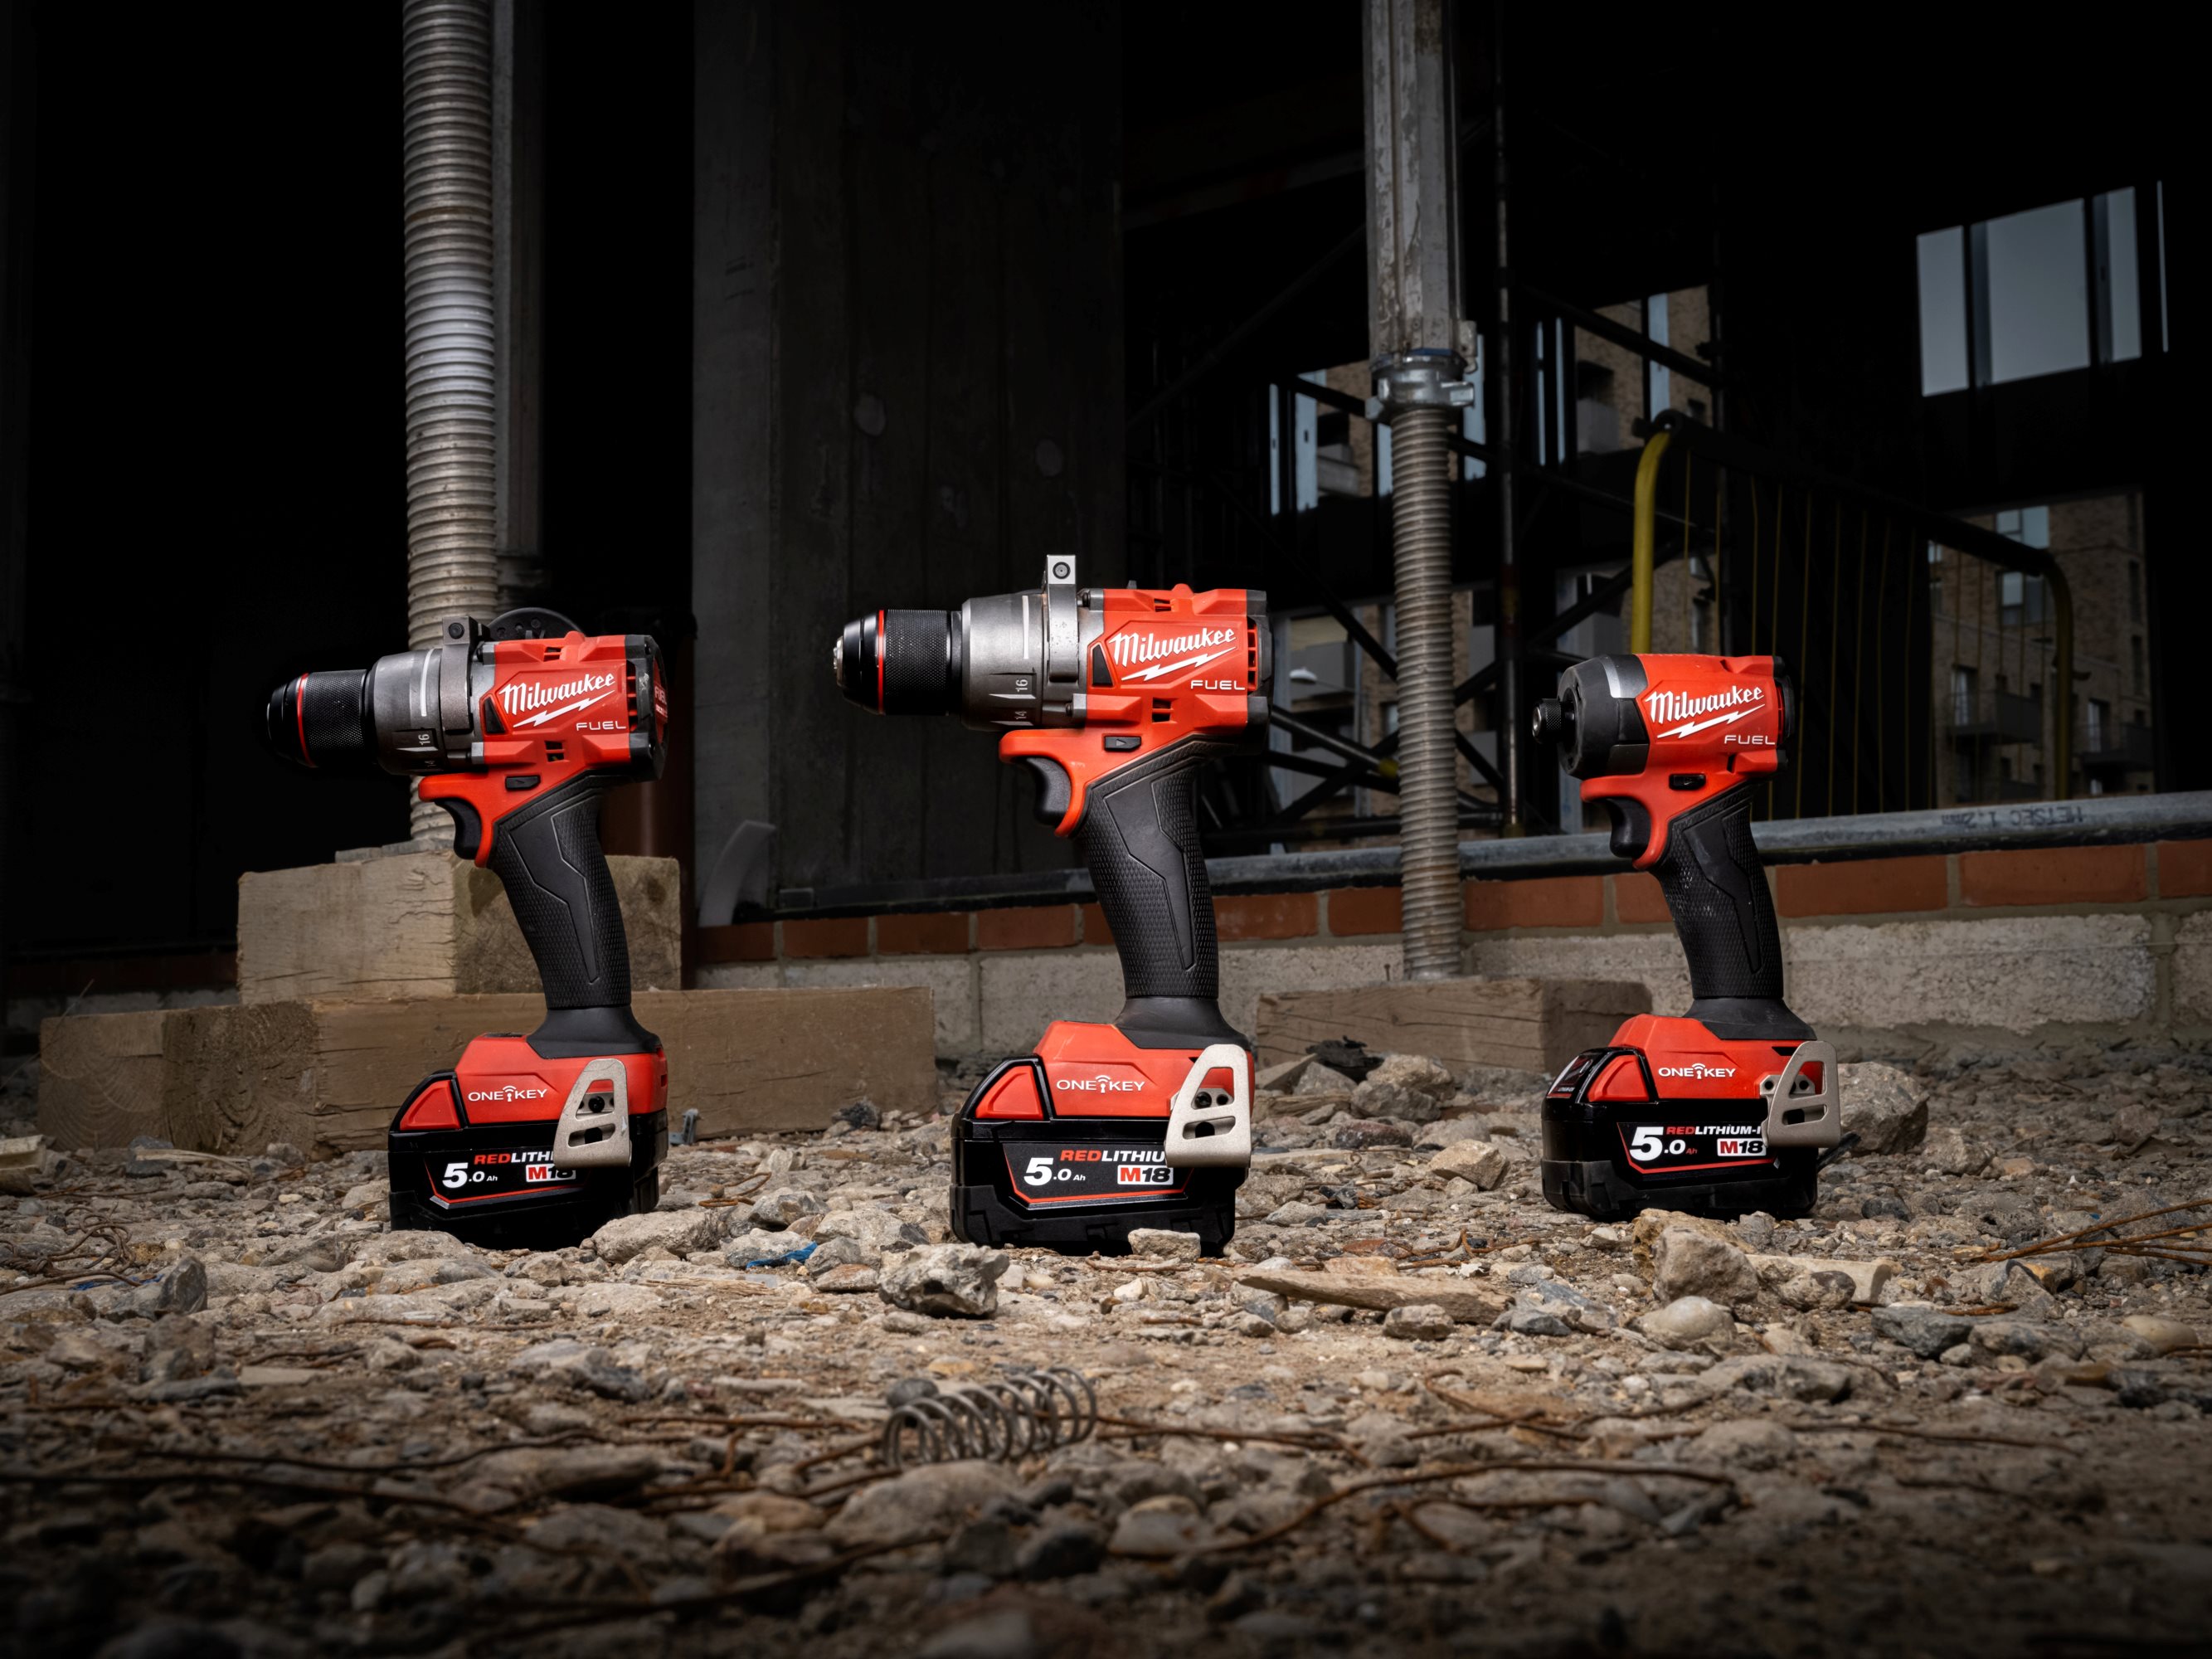 MILWAUKEE® Drives Technology Innovation with Drilling and Driving